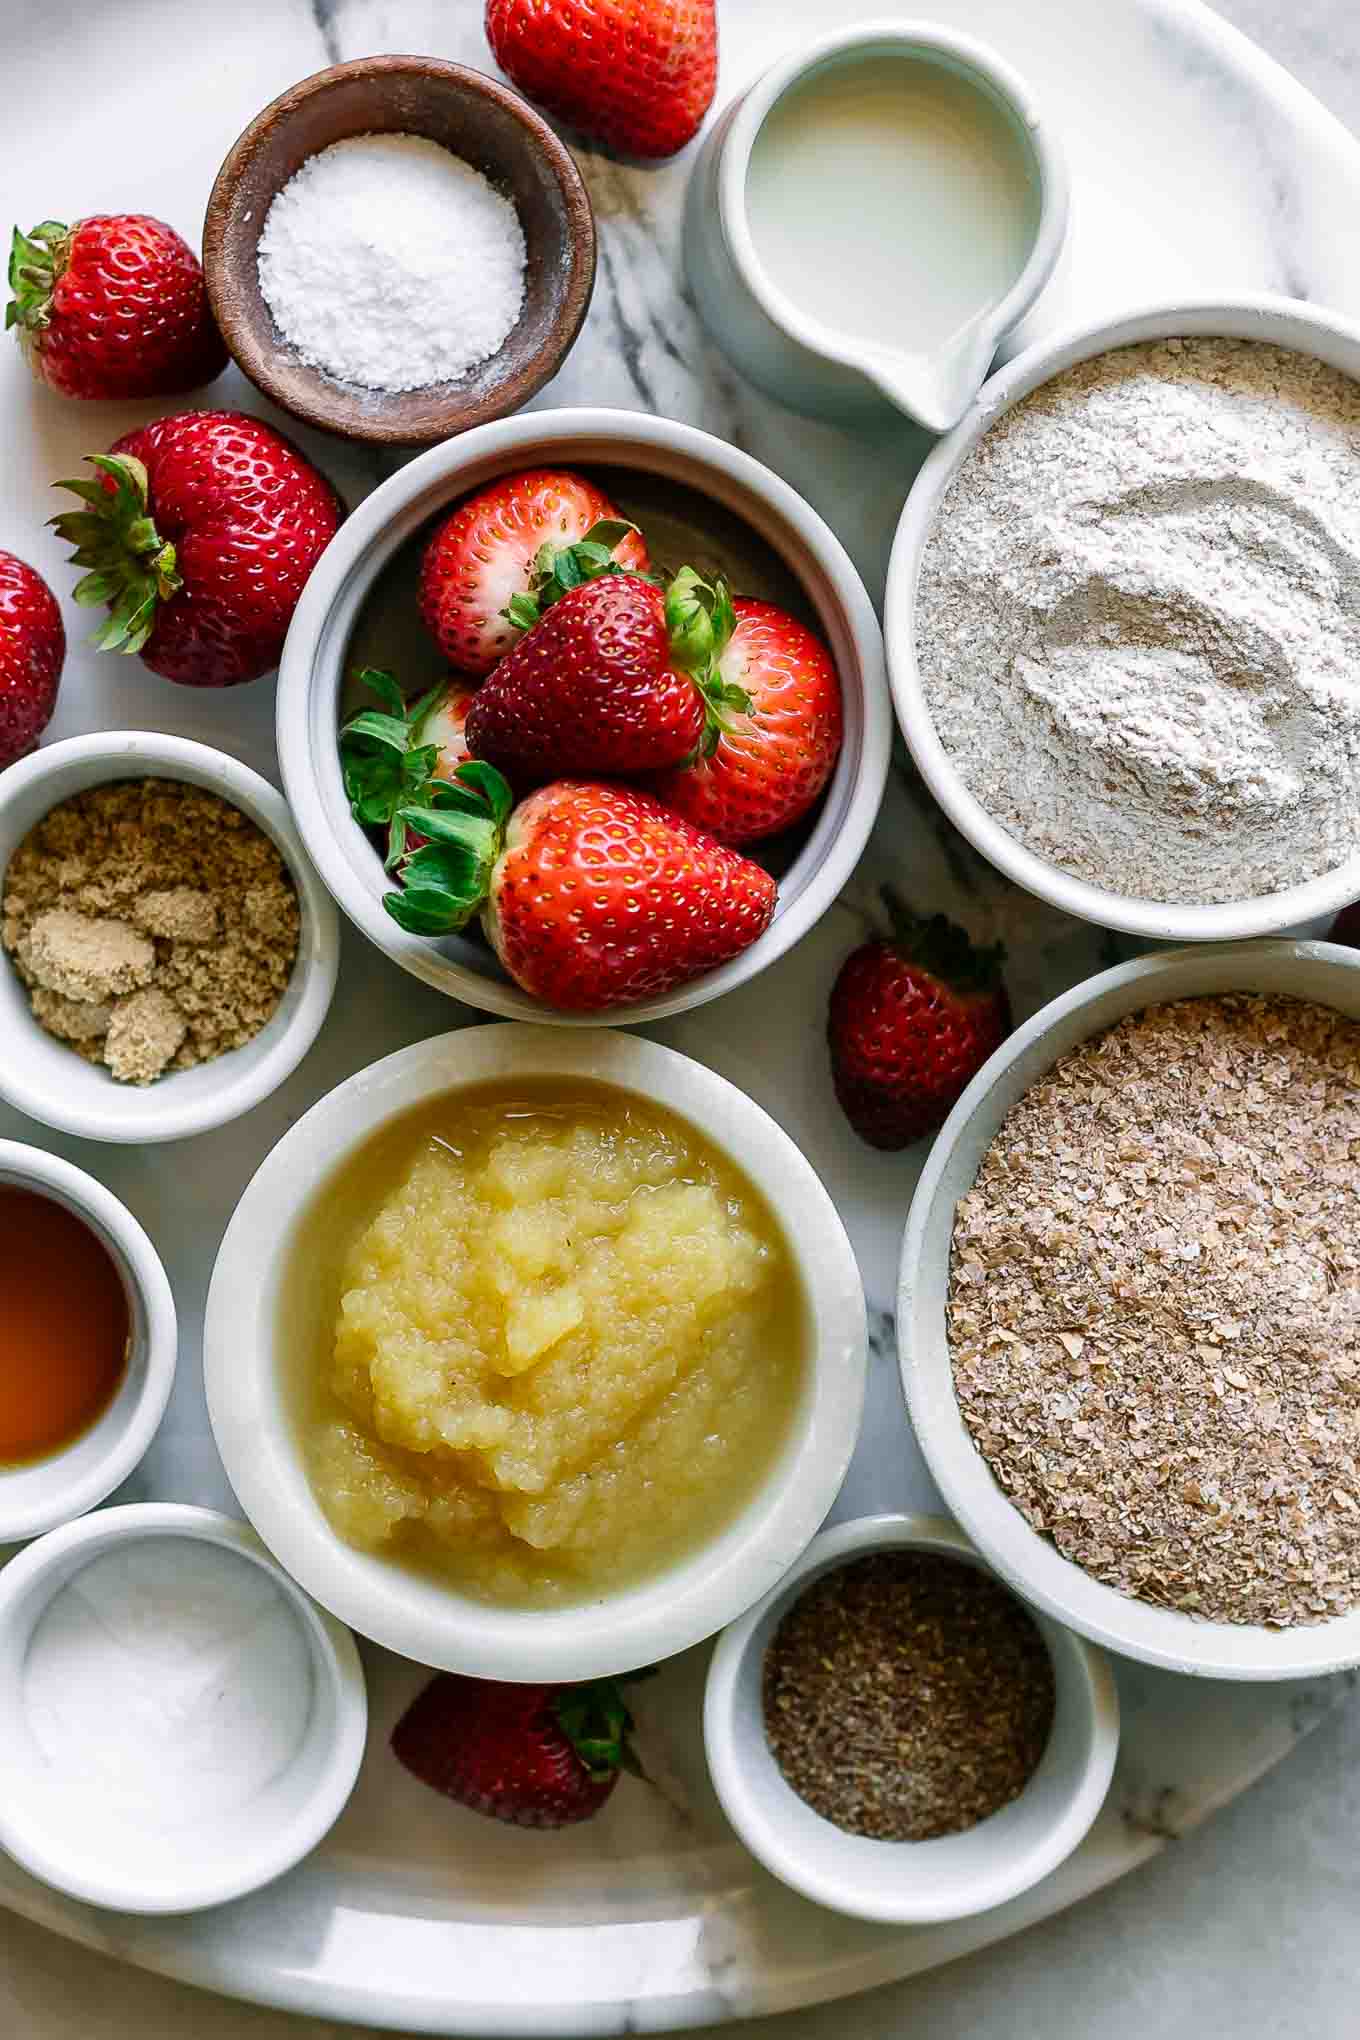 bowls of flour, wheat bran, applesauce, strawberries, and other ingredients for bran muffins